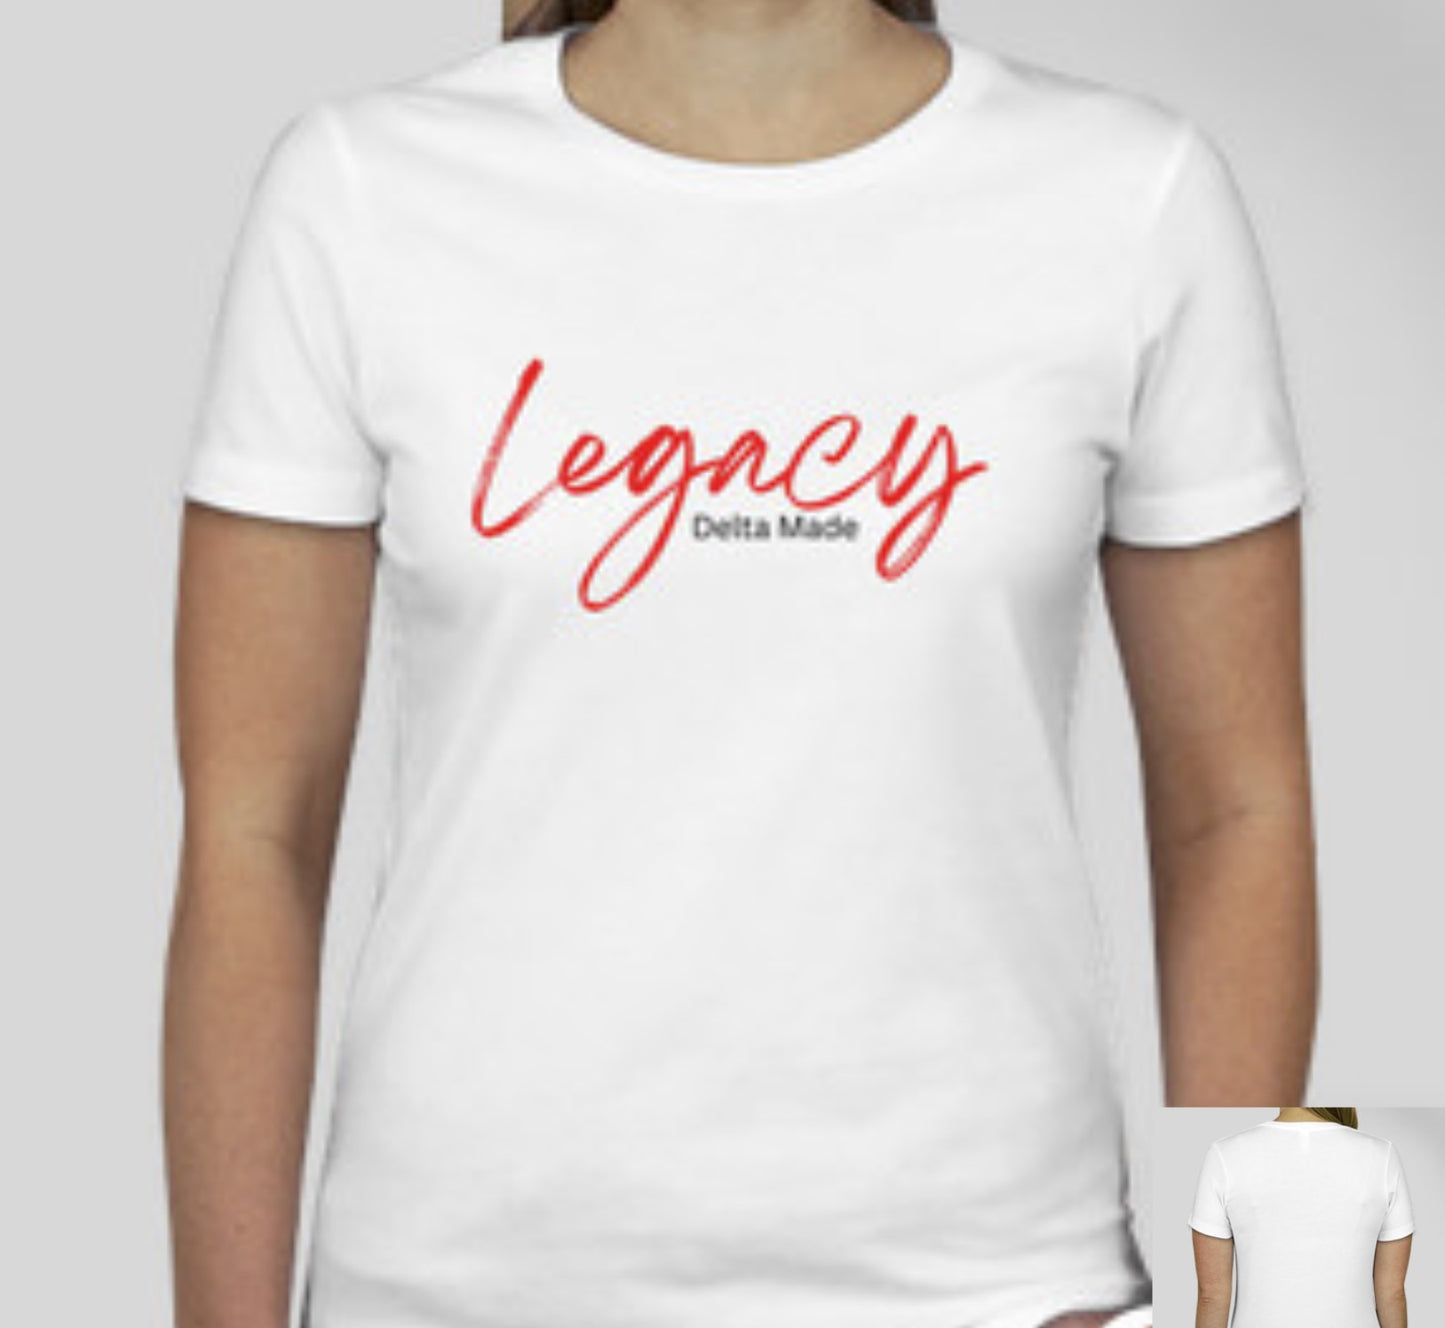 T-Shirt - Legacy Delta Made